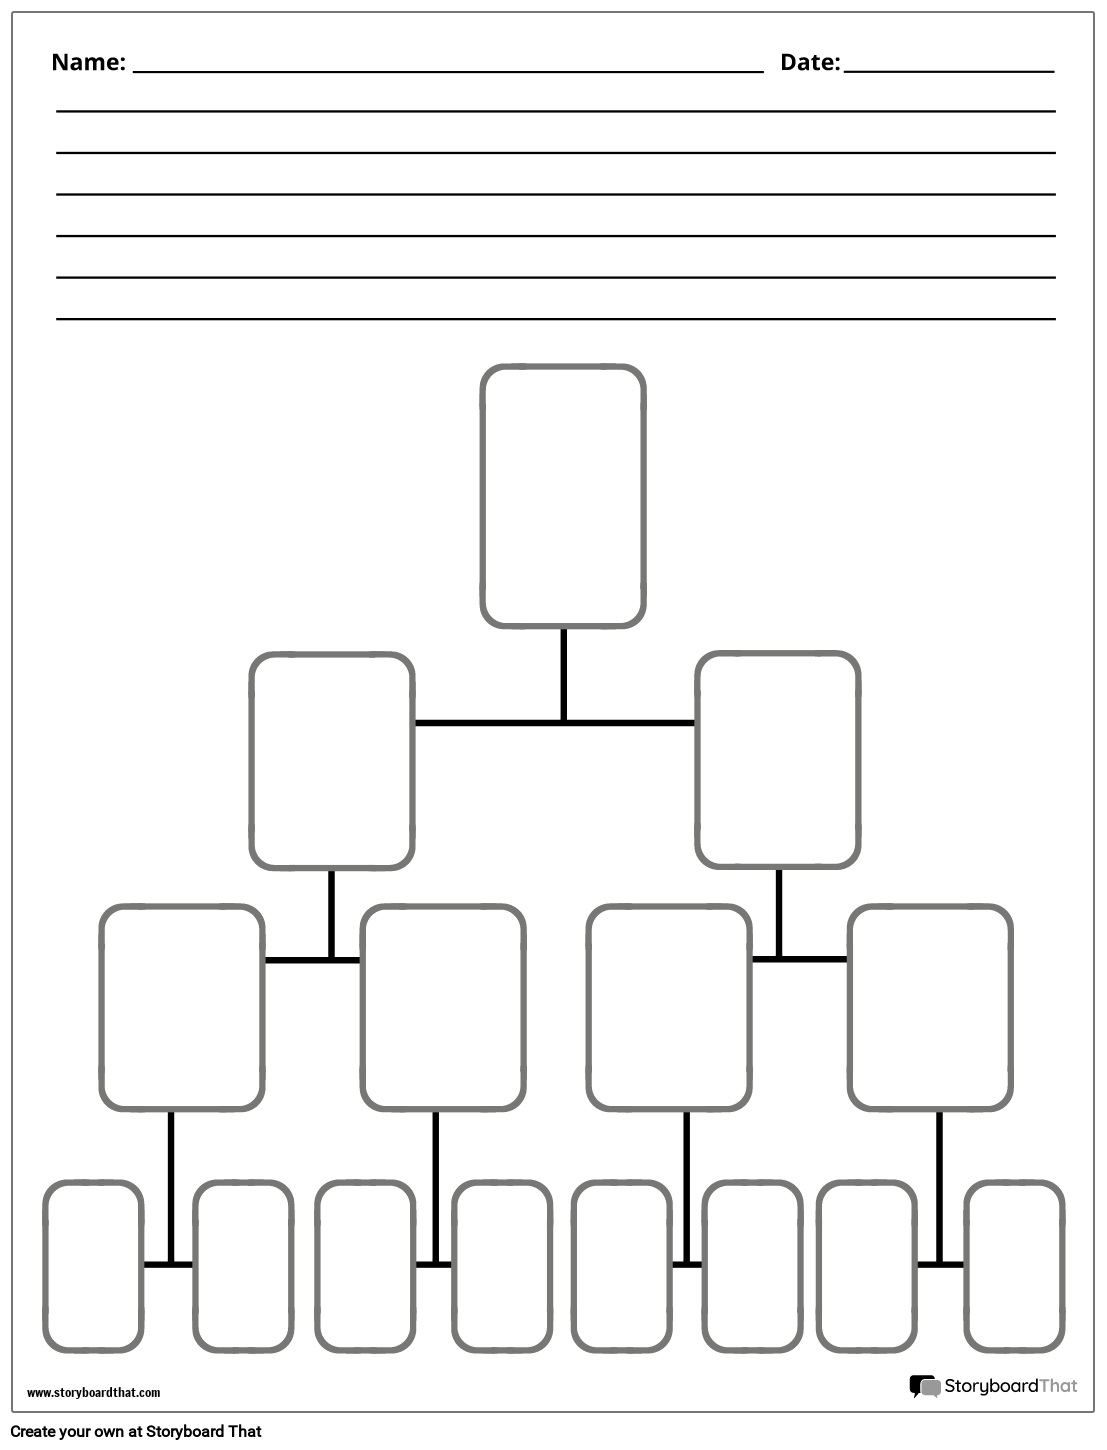 Simple Lines and Boxes Based Tree Diagram Template